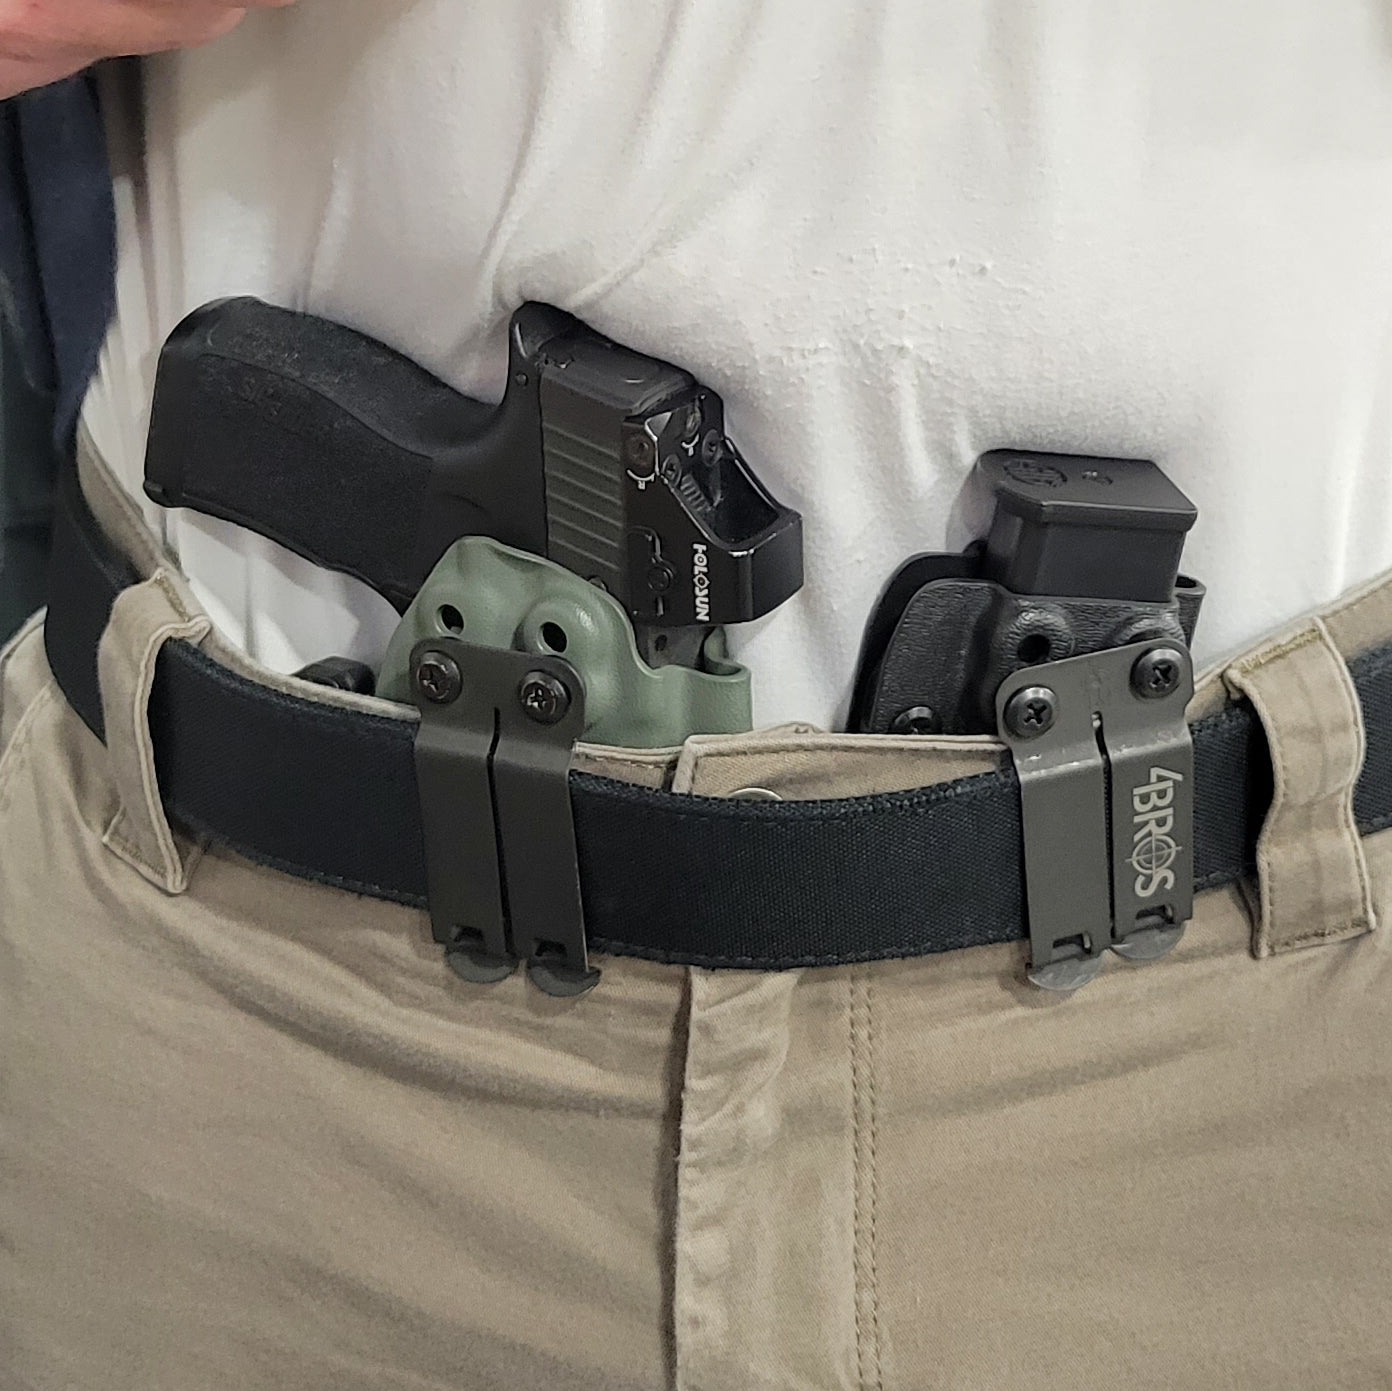 For the Best Kydex IWB AIWB appendix inside waistband magazine pouch for the Smith & Wesson Equalizer, shop Four Brothers Holsters. Suitable for belt widths of 1 1/2" & 1 3/4". Adjustable retention. Appendix Carry IWB Carrier Holster P365X-MACRO, Sig P365XL, Glock 43X & 48, Springfield Hellcat Pro, and Shield Plus